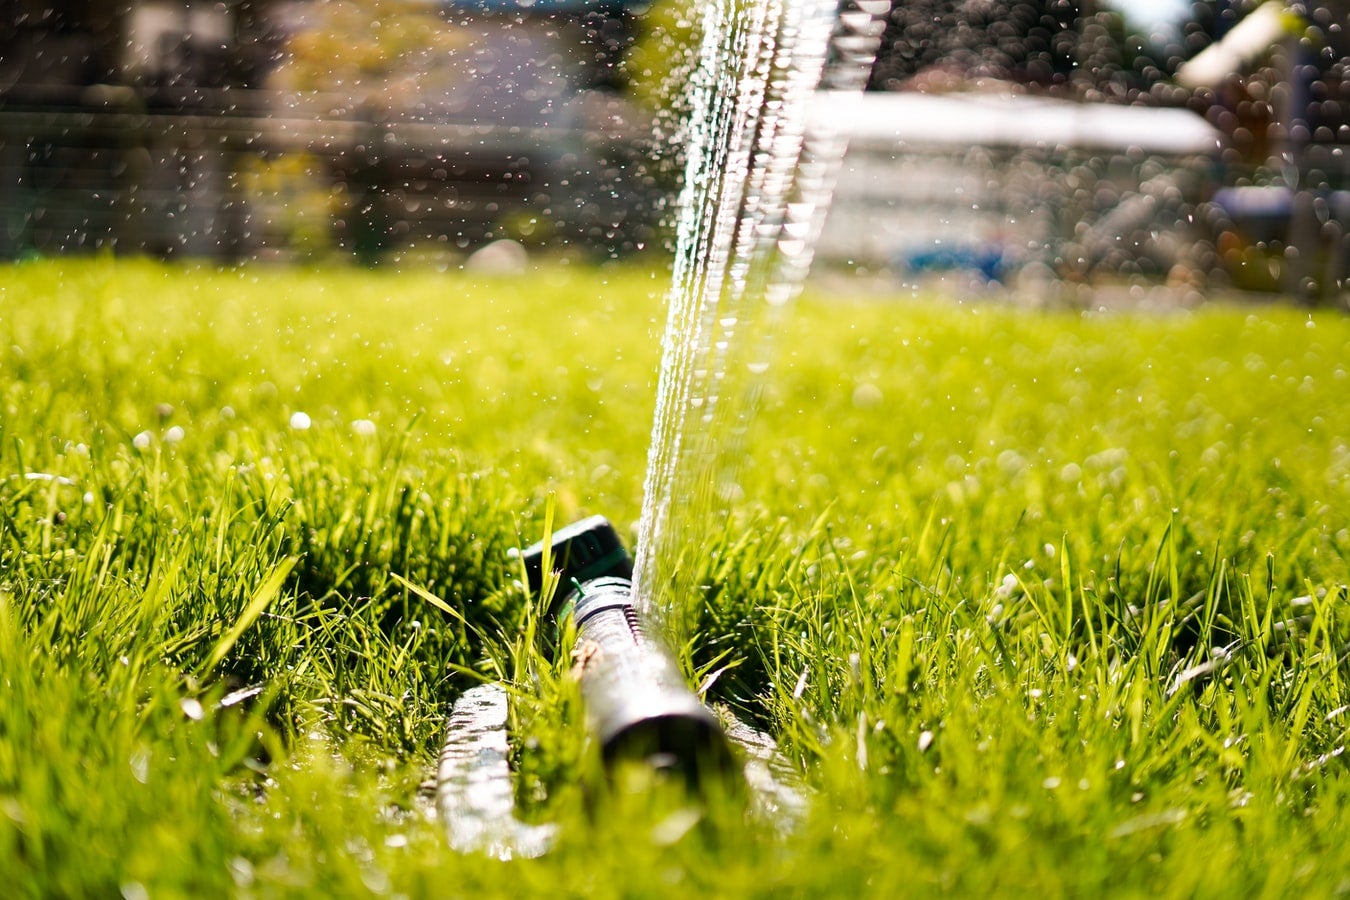 The best sprinkler system helps keep your grass healthy and green.